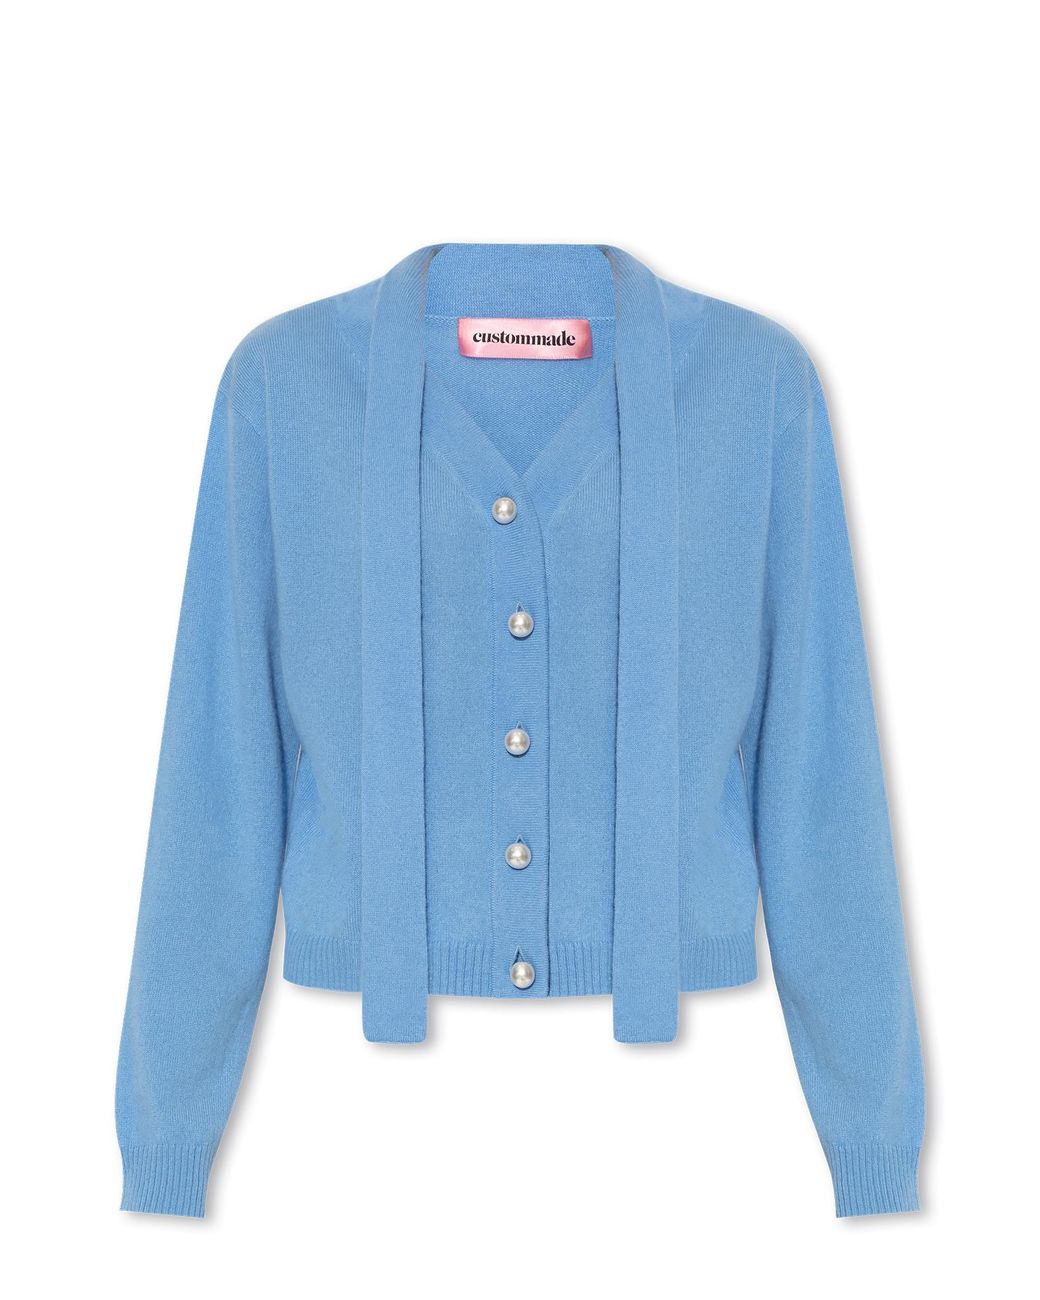 Custommade• 'vaia' Cashmere Cardigan in Blue | Lyst